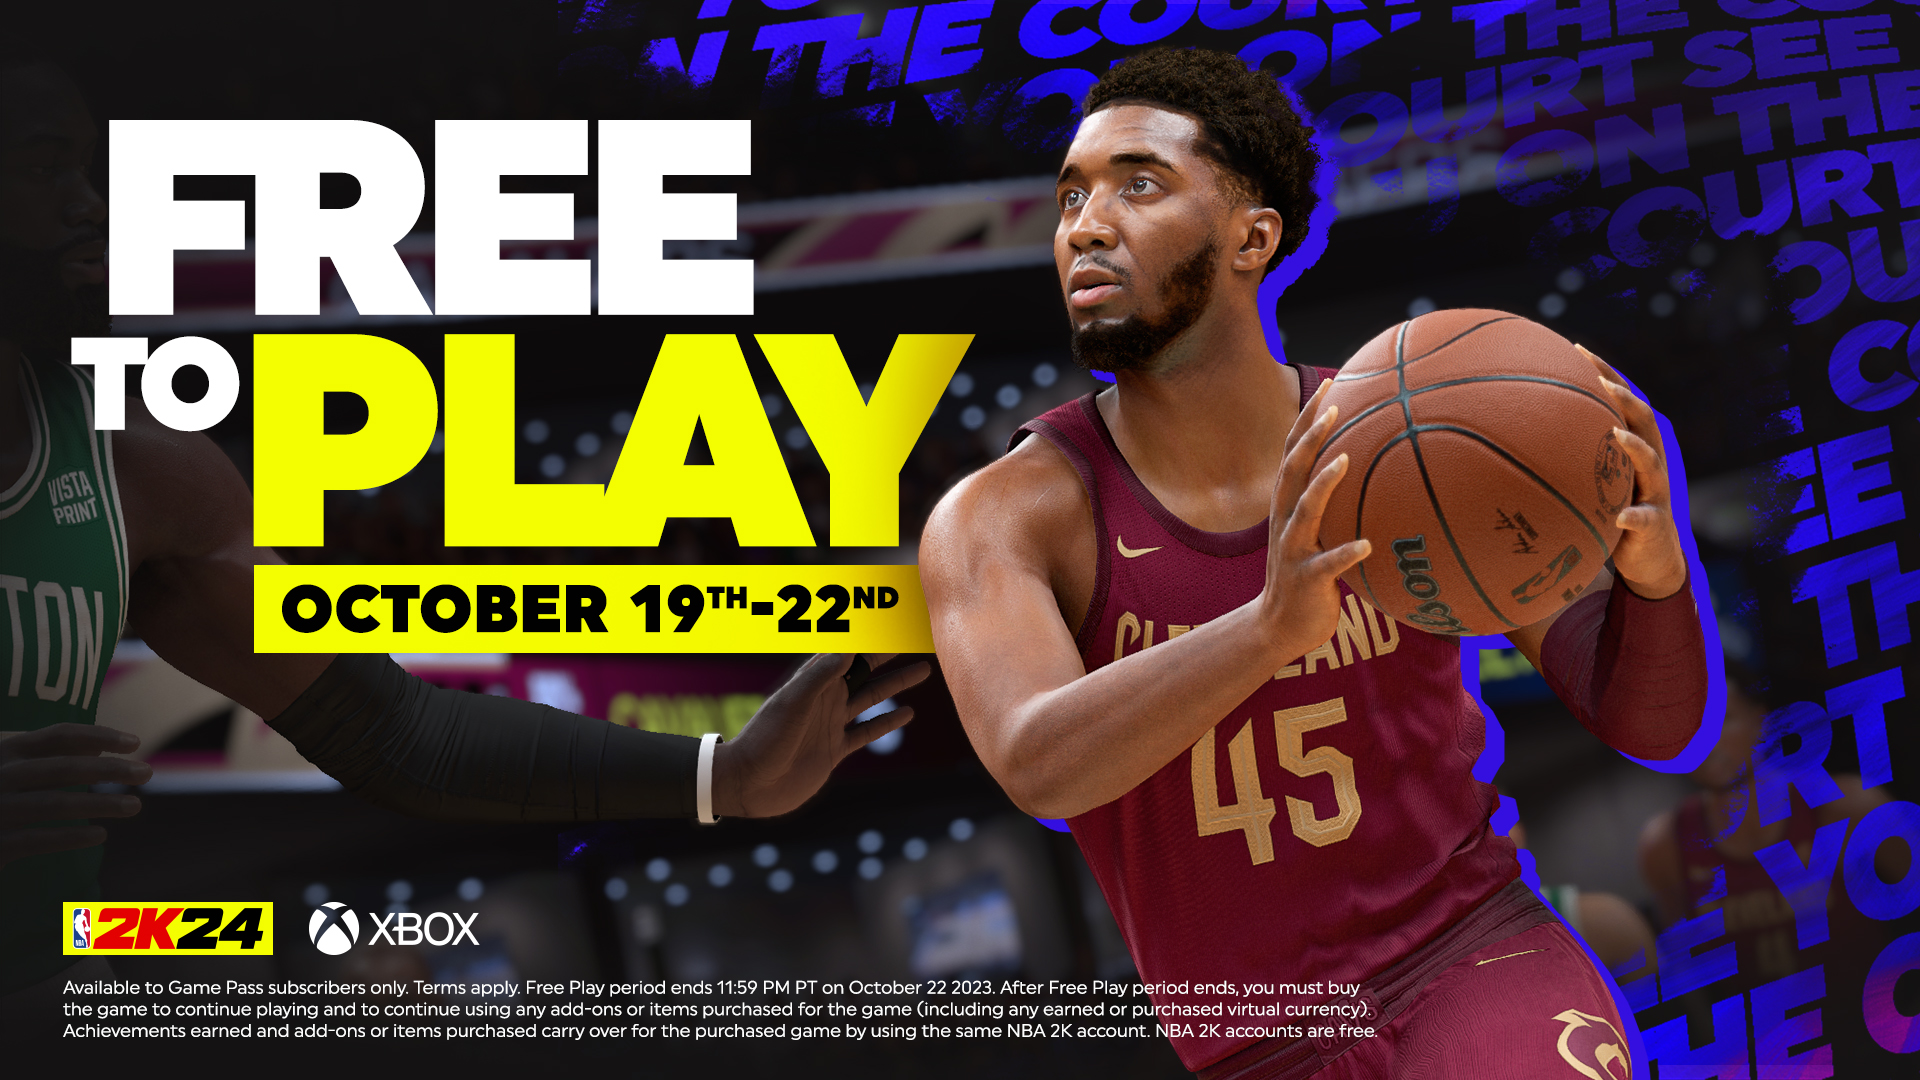 Play NBA 2K24 Through the Weekend with Xbox Live Free Play Days